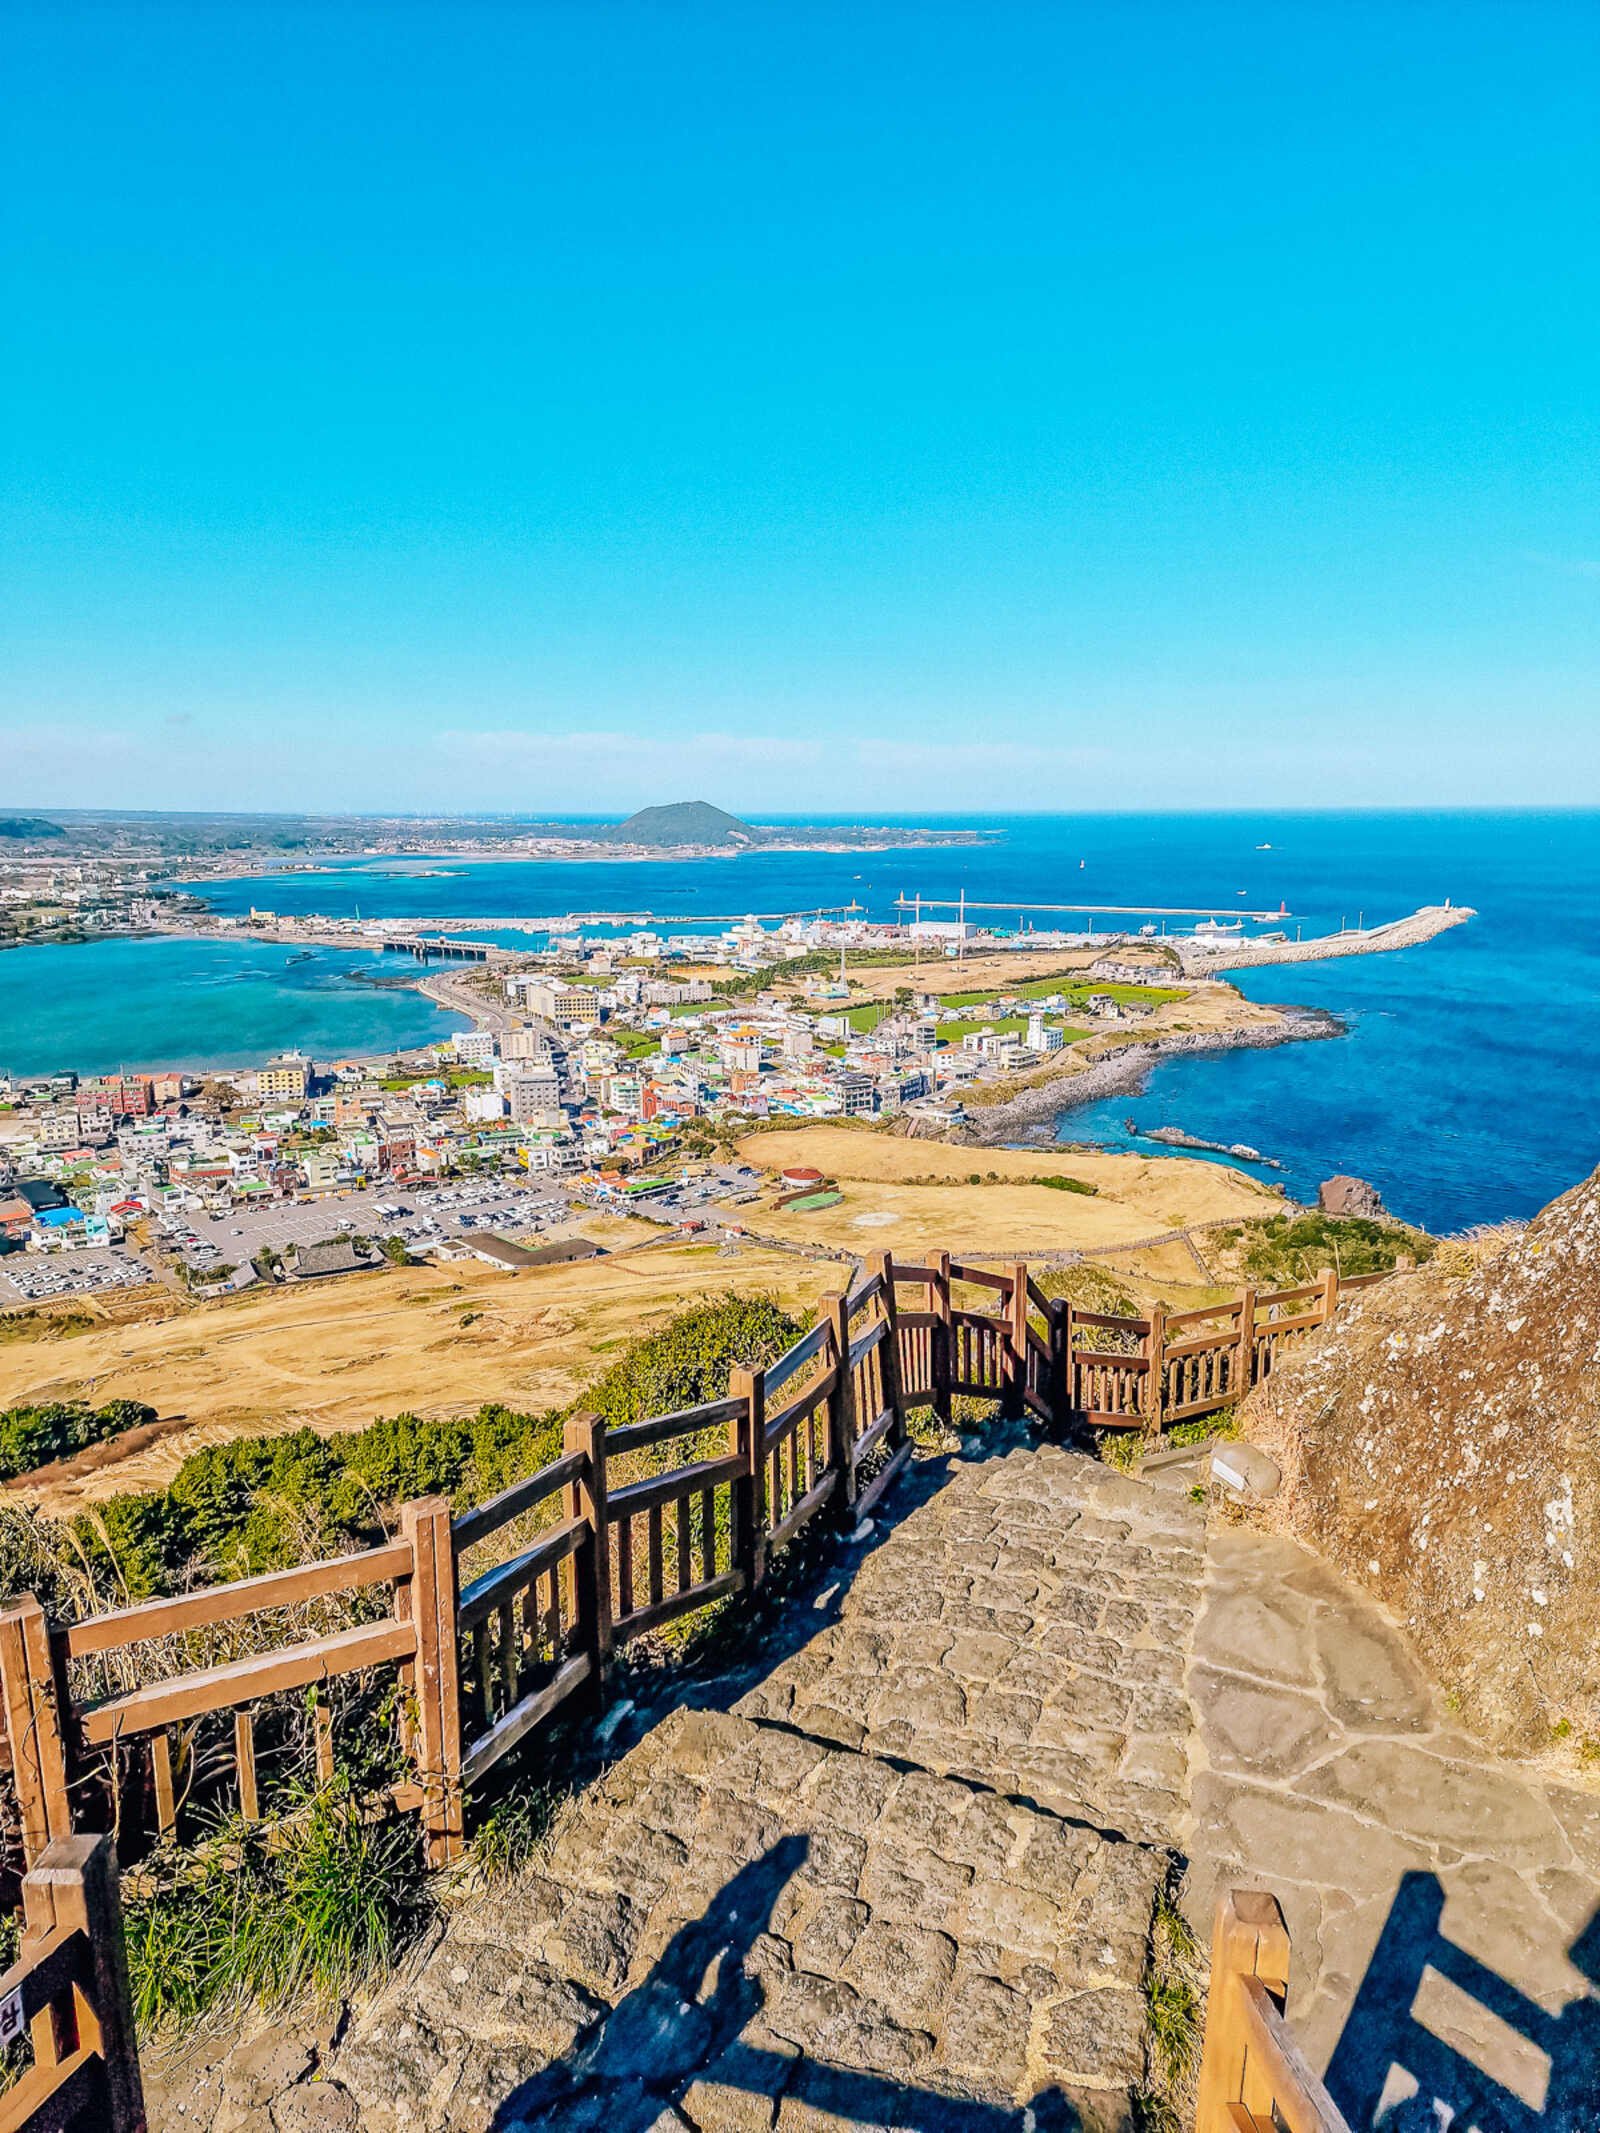 Looking down stone steps to a view of a small coastal town surrounded by blue sea